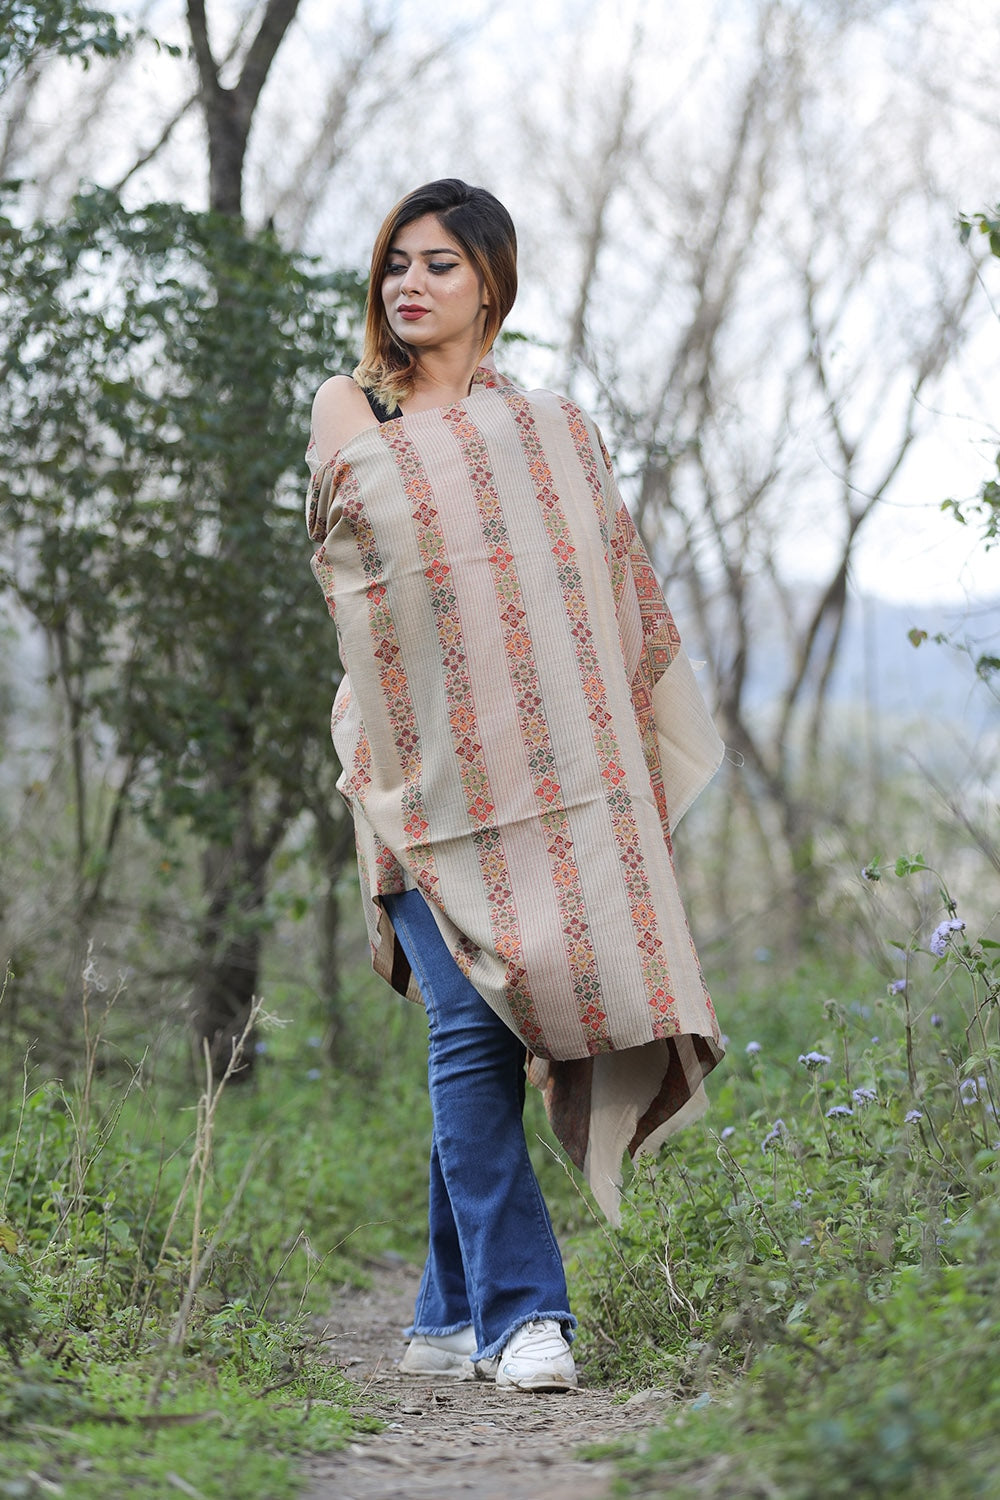 Steady Beige Colour Shawl With Flower Pattern Style Bold